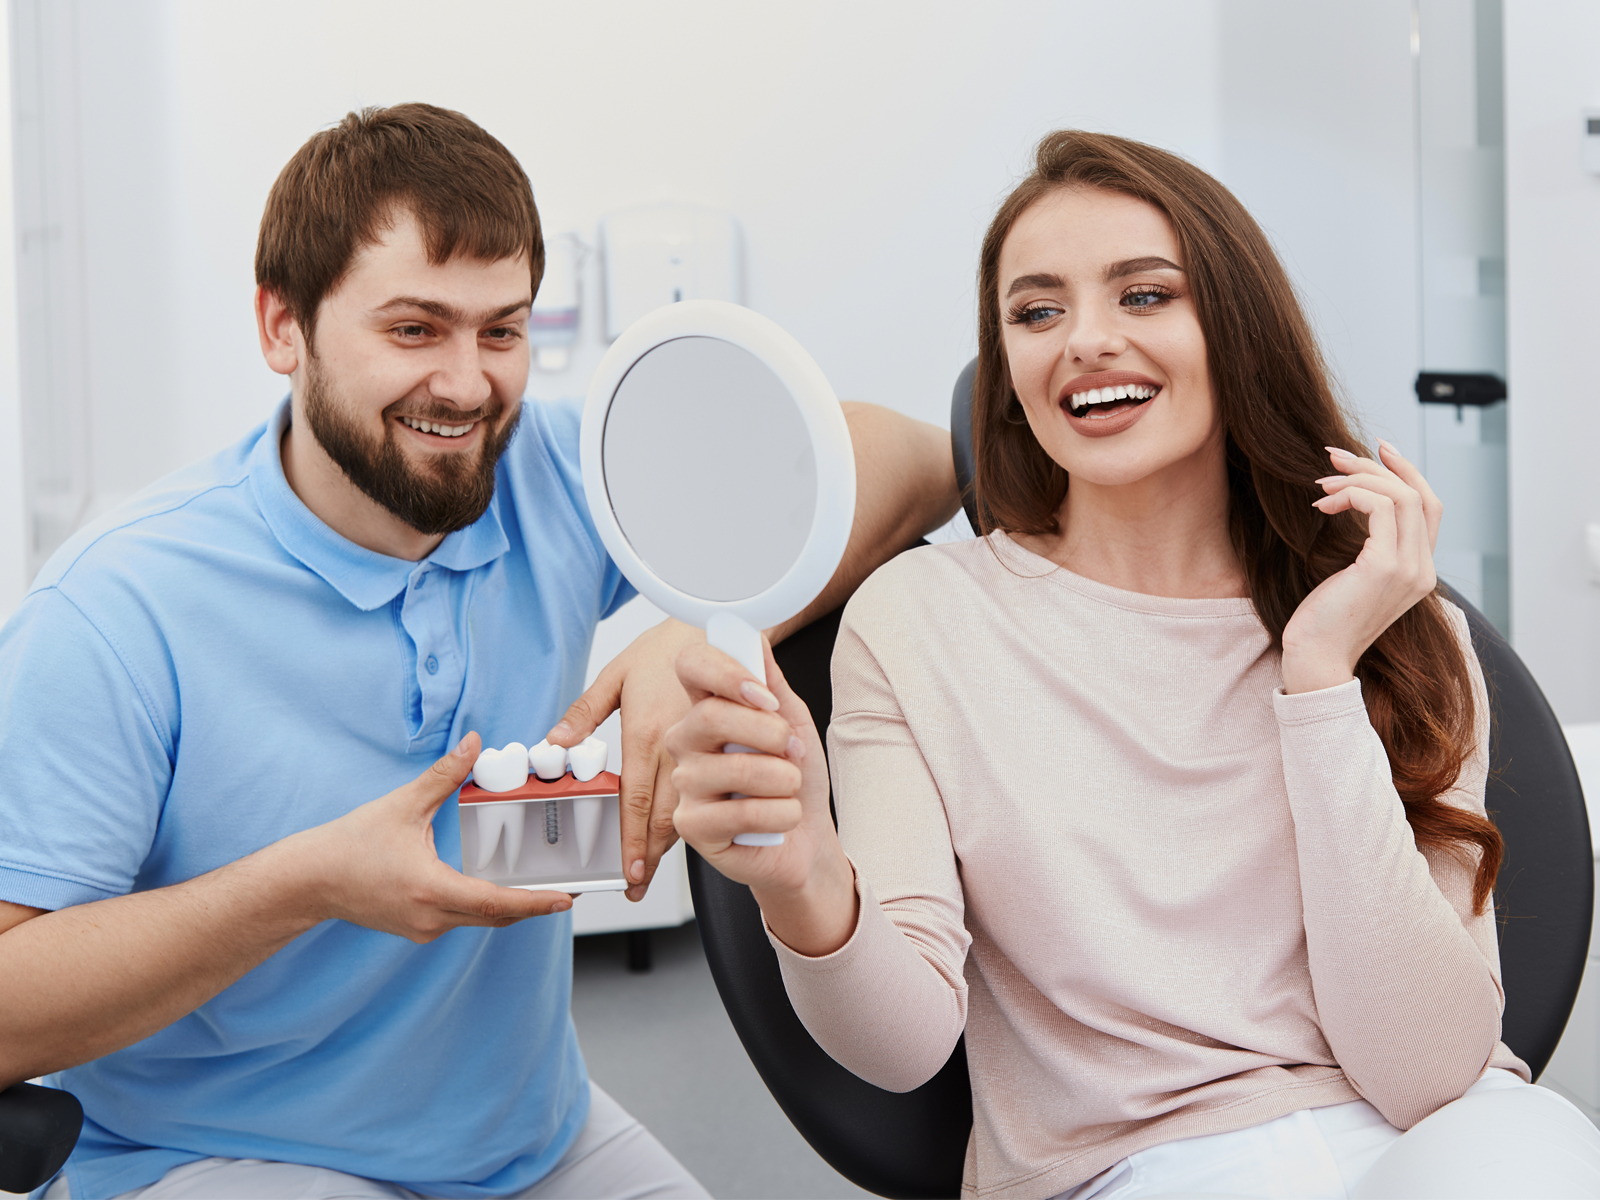 How To Practice Good Oral Hygiene With Implants